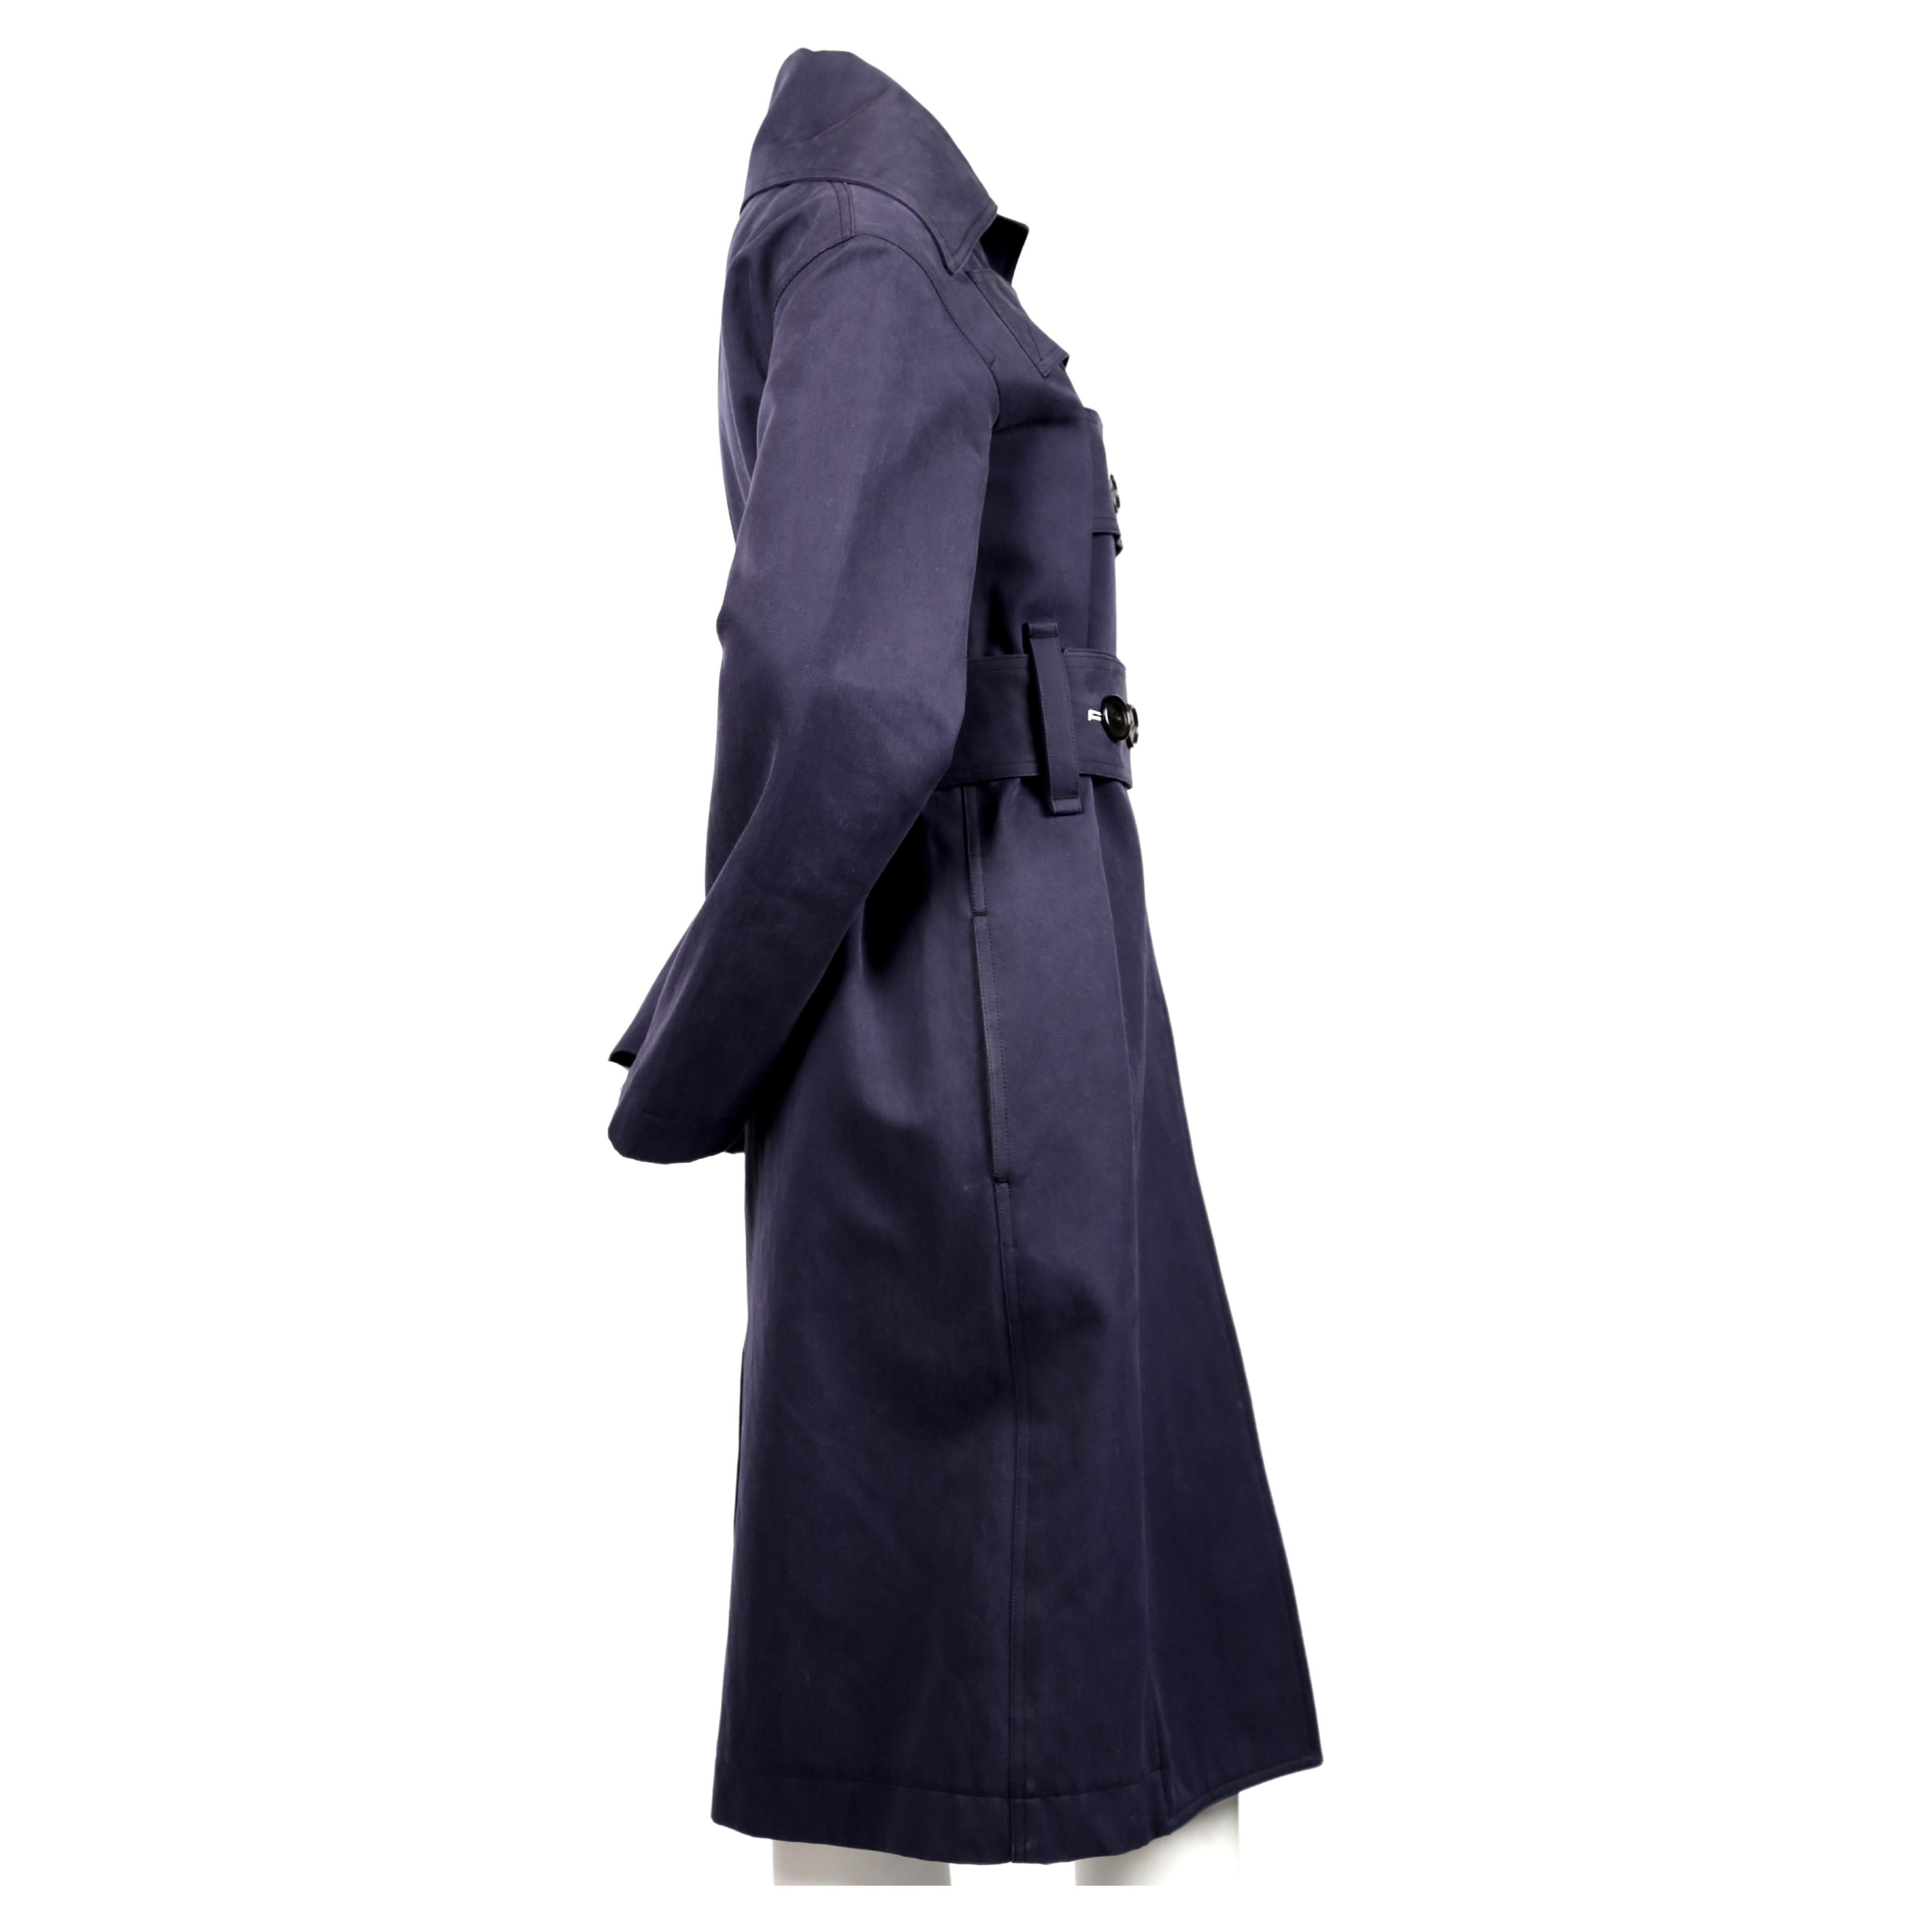 Navy-blue, brushed-cotton, trench coat with unique button closure designed by Phoebe Philo. French size 38. Approximate measurements: drop shoulder 19